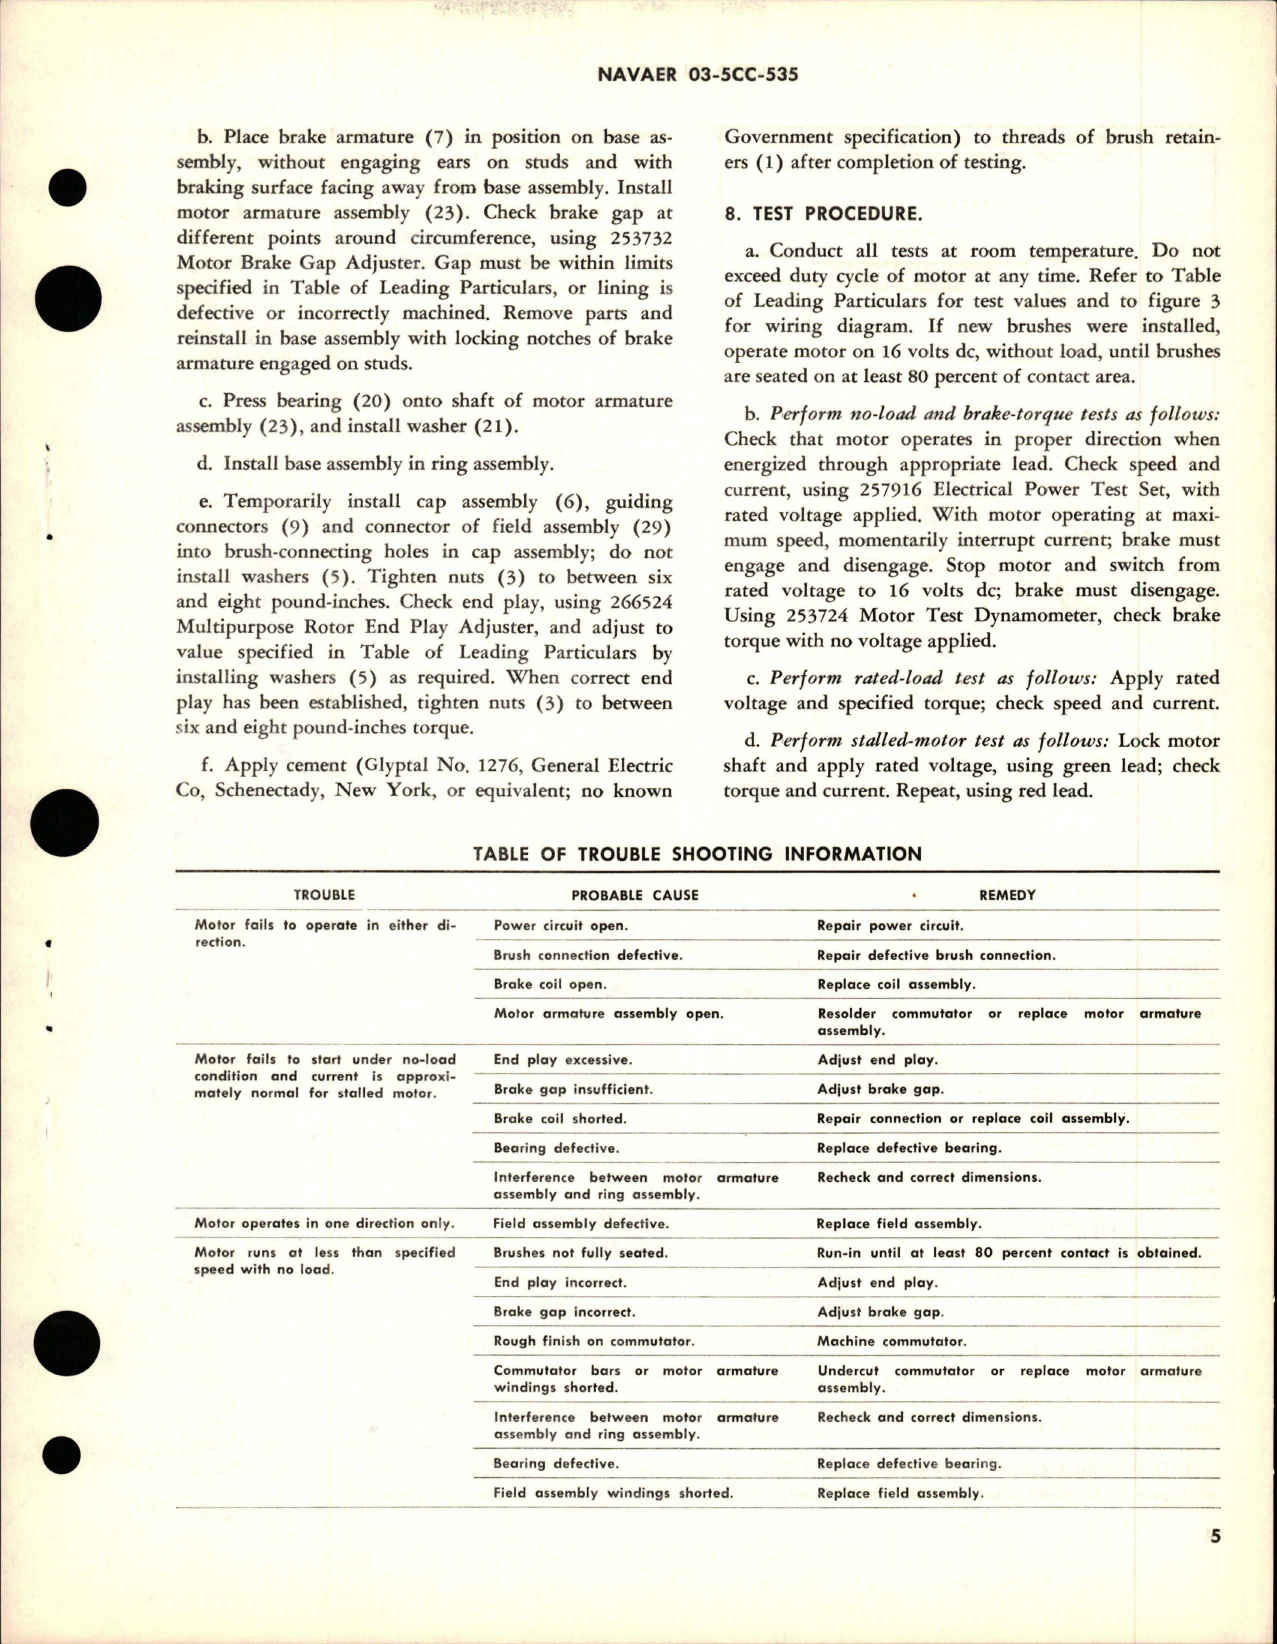 Sample page 5 from AirCorps Library document: Overhaul Instructions with Parts Breakdown for Direct-Current Motors - Parts 32741 and 32741-1 - Model DCM15-245-1